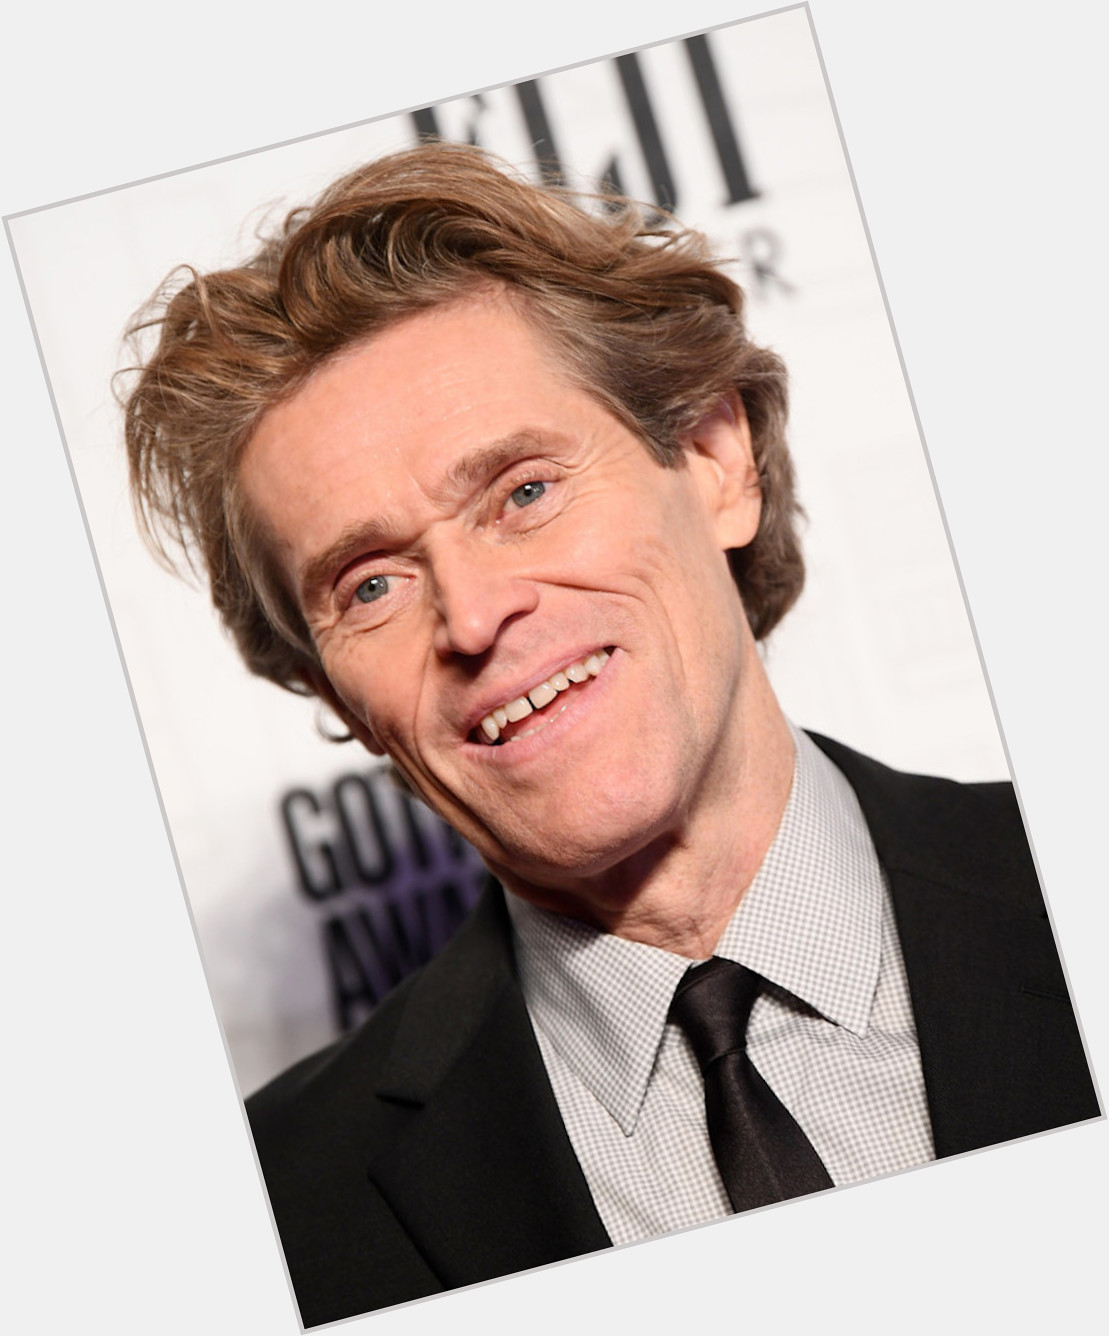 Happy Birthday to Willem Dafoe, who turns 66 today!!!

What\s your favorite Willem Dafoe performance??? 